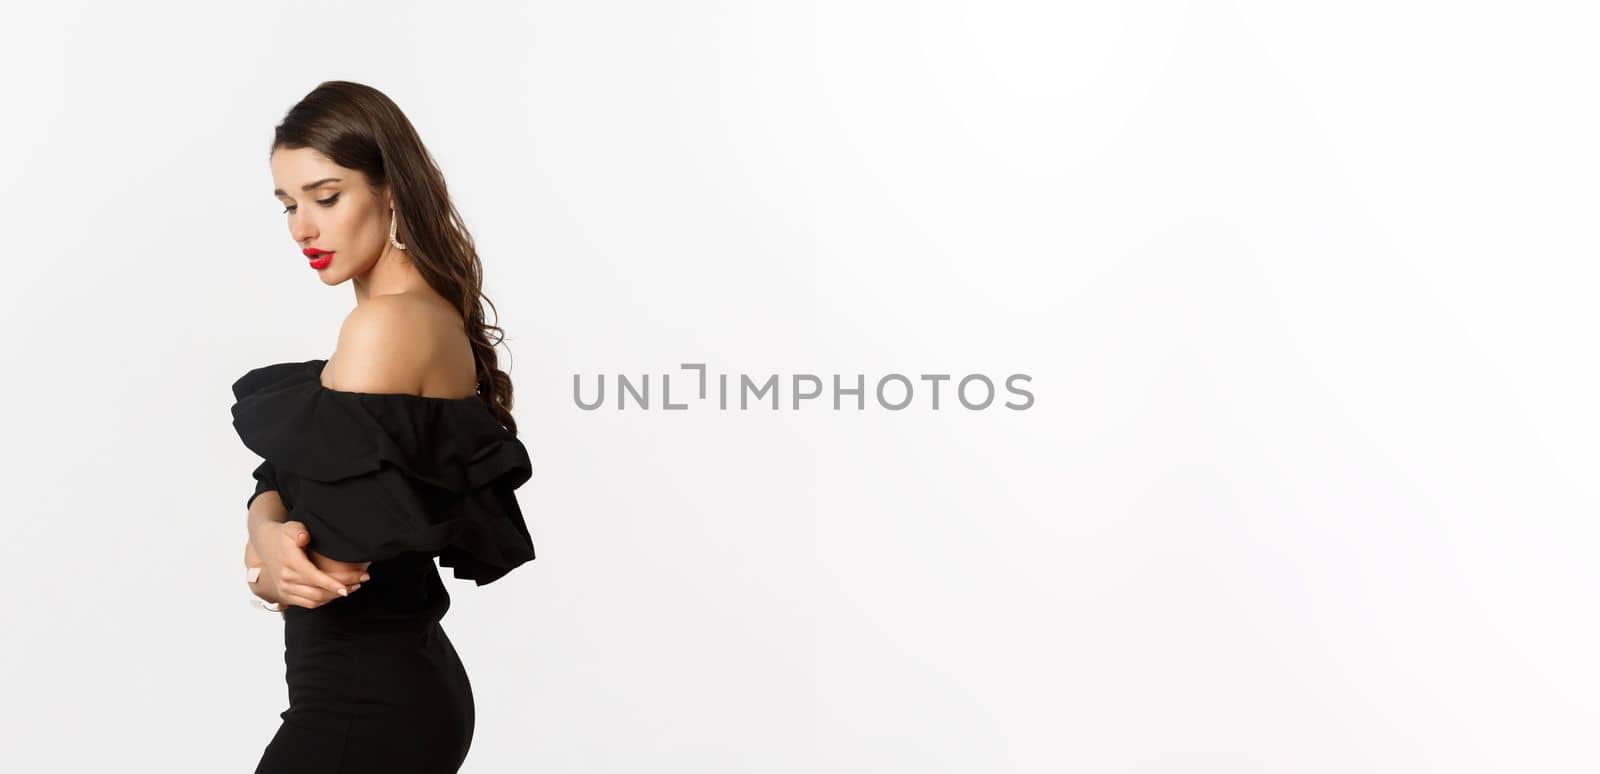 Profile of sensual brunette woman in black elegant dress, looking down, standing over white background.